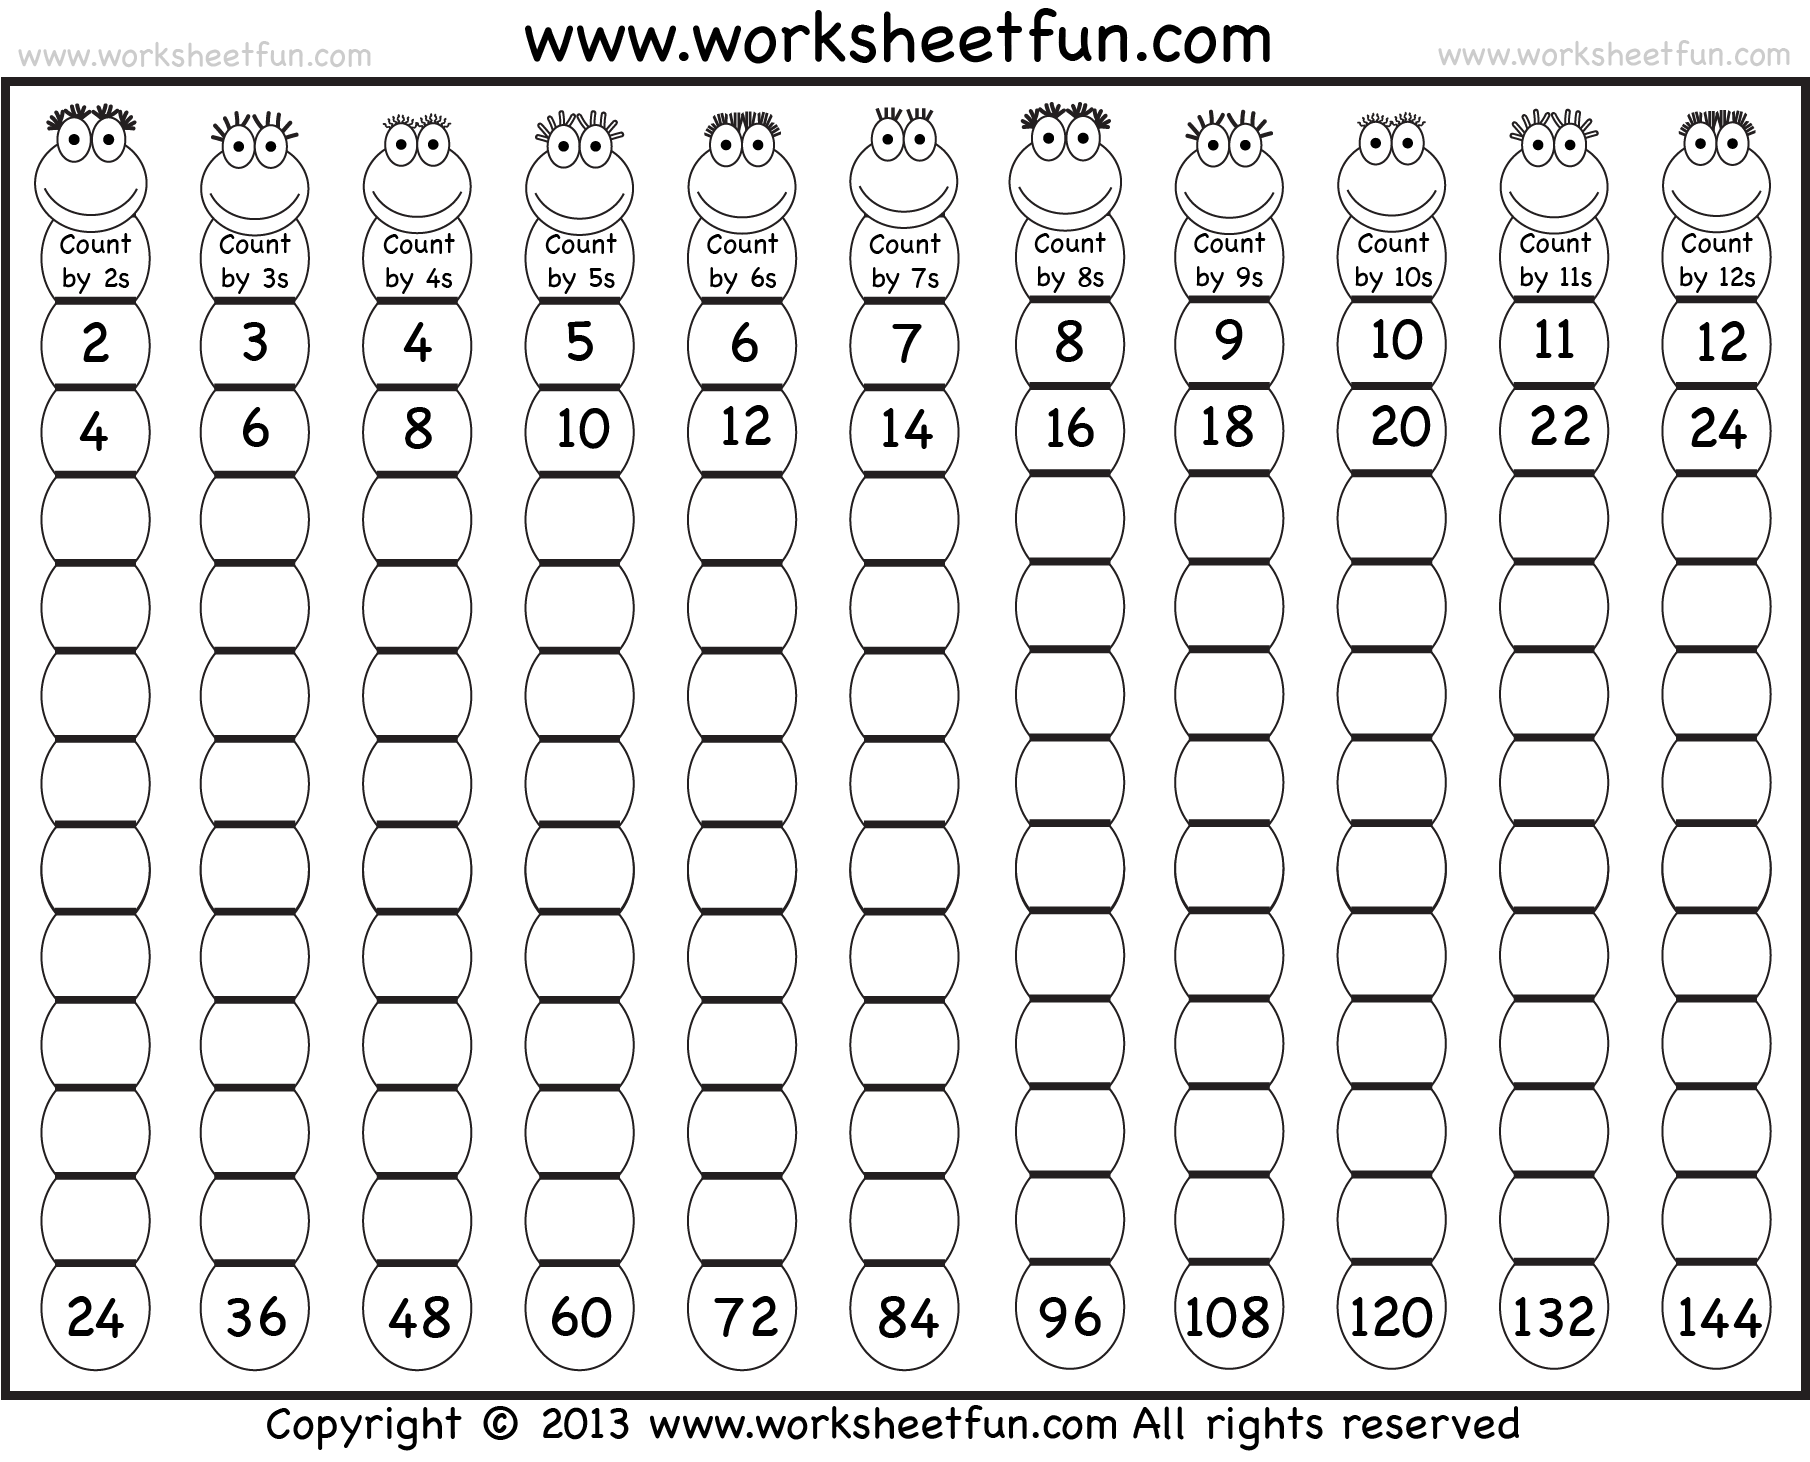 skip-counting-by-10-worksheet